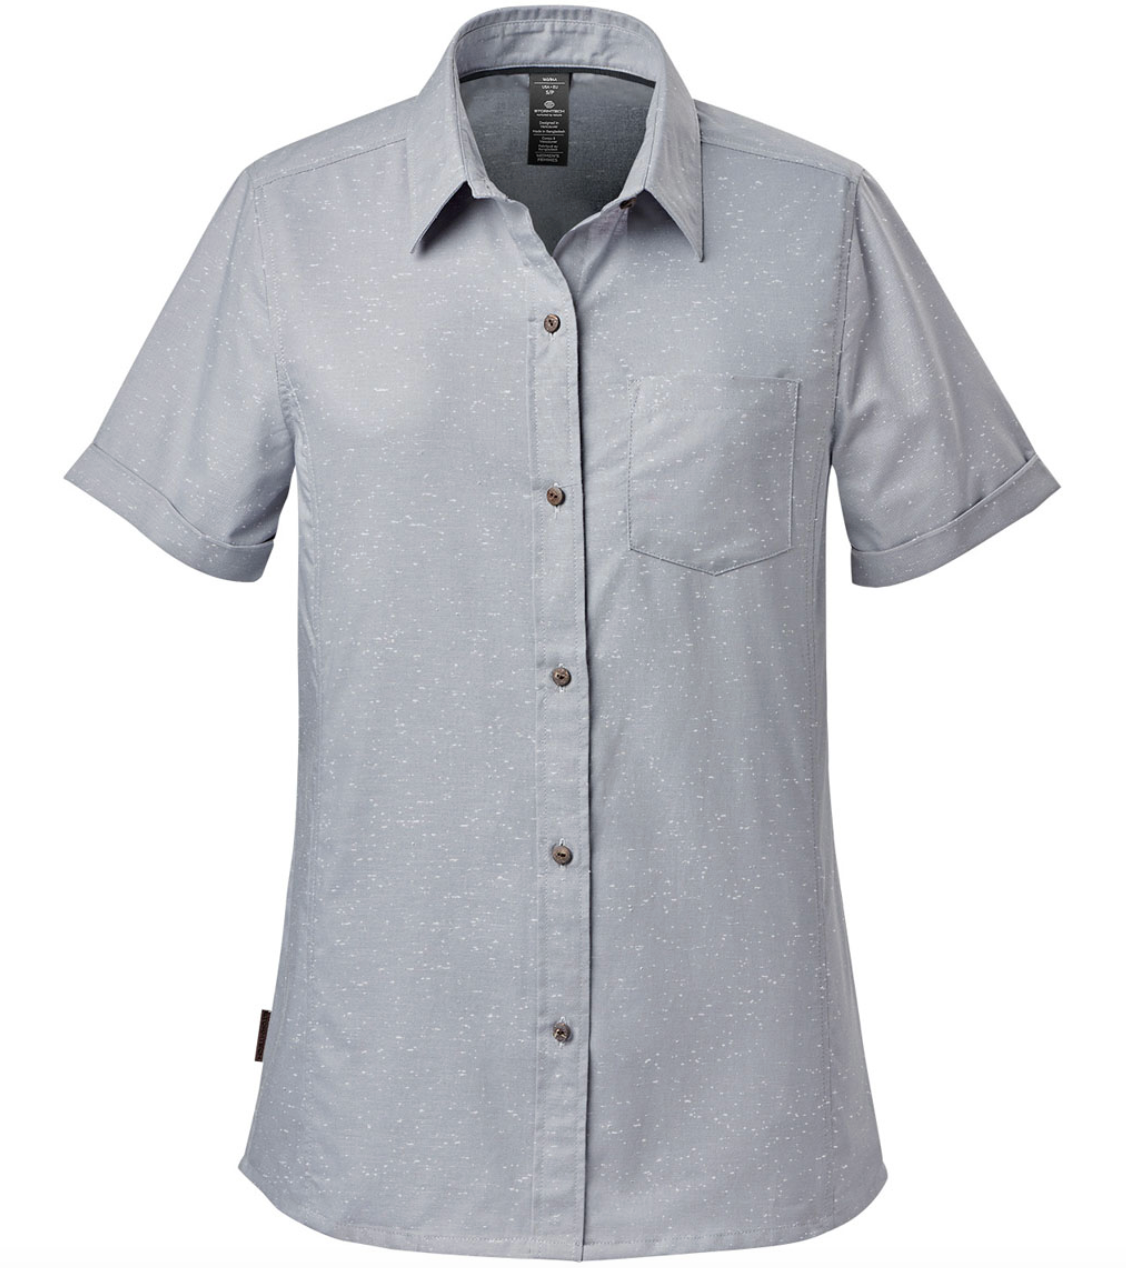 Traditional Short Sleeve Shirt – Oyster Promo Inc.